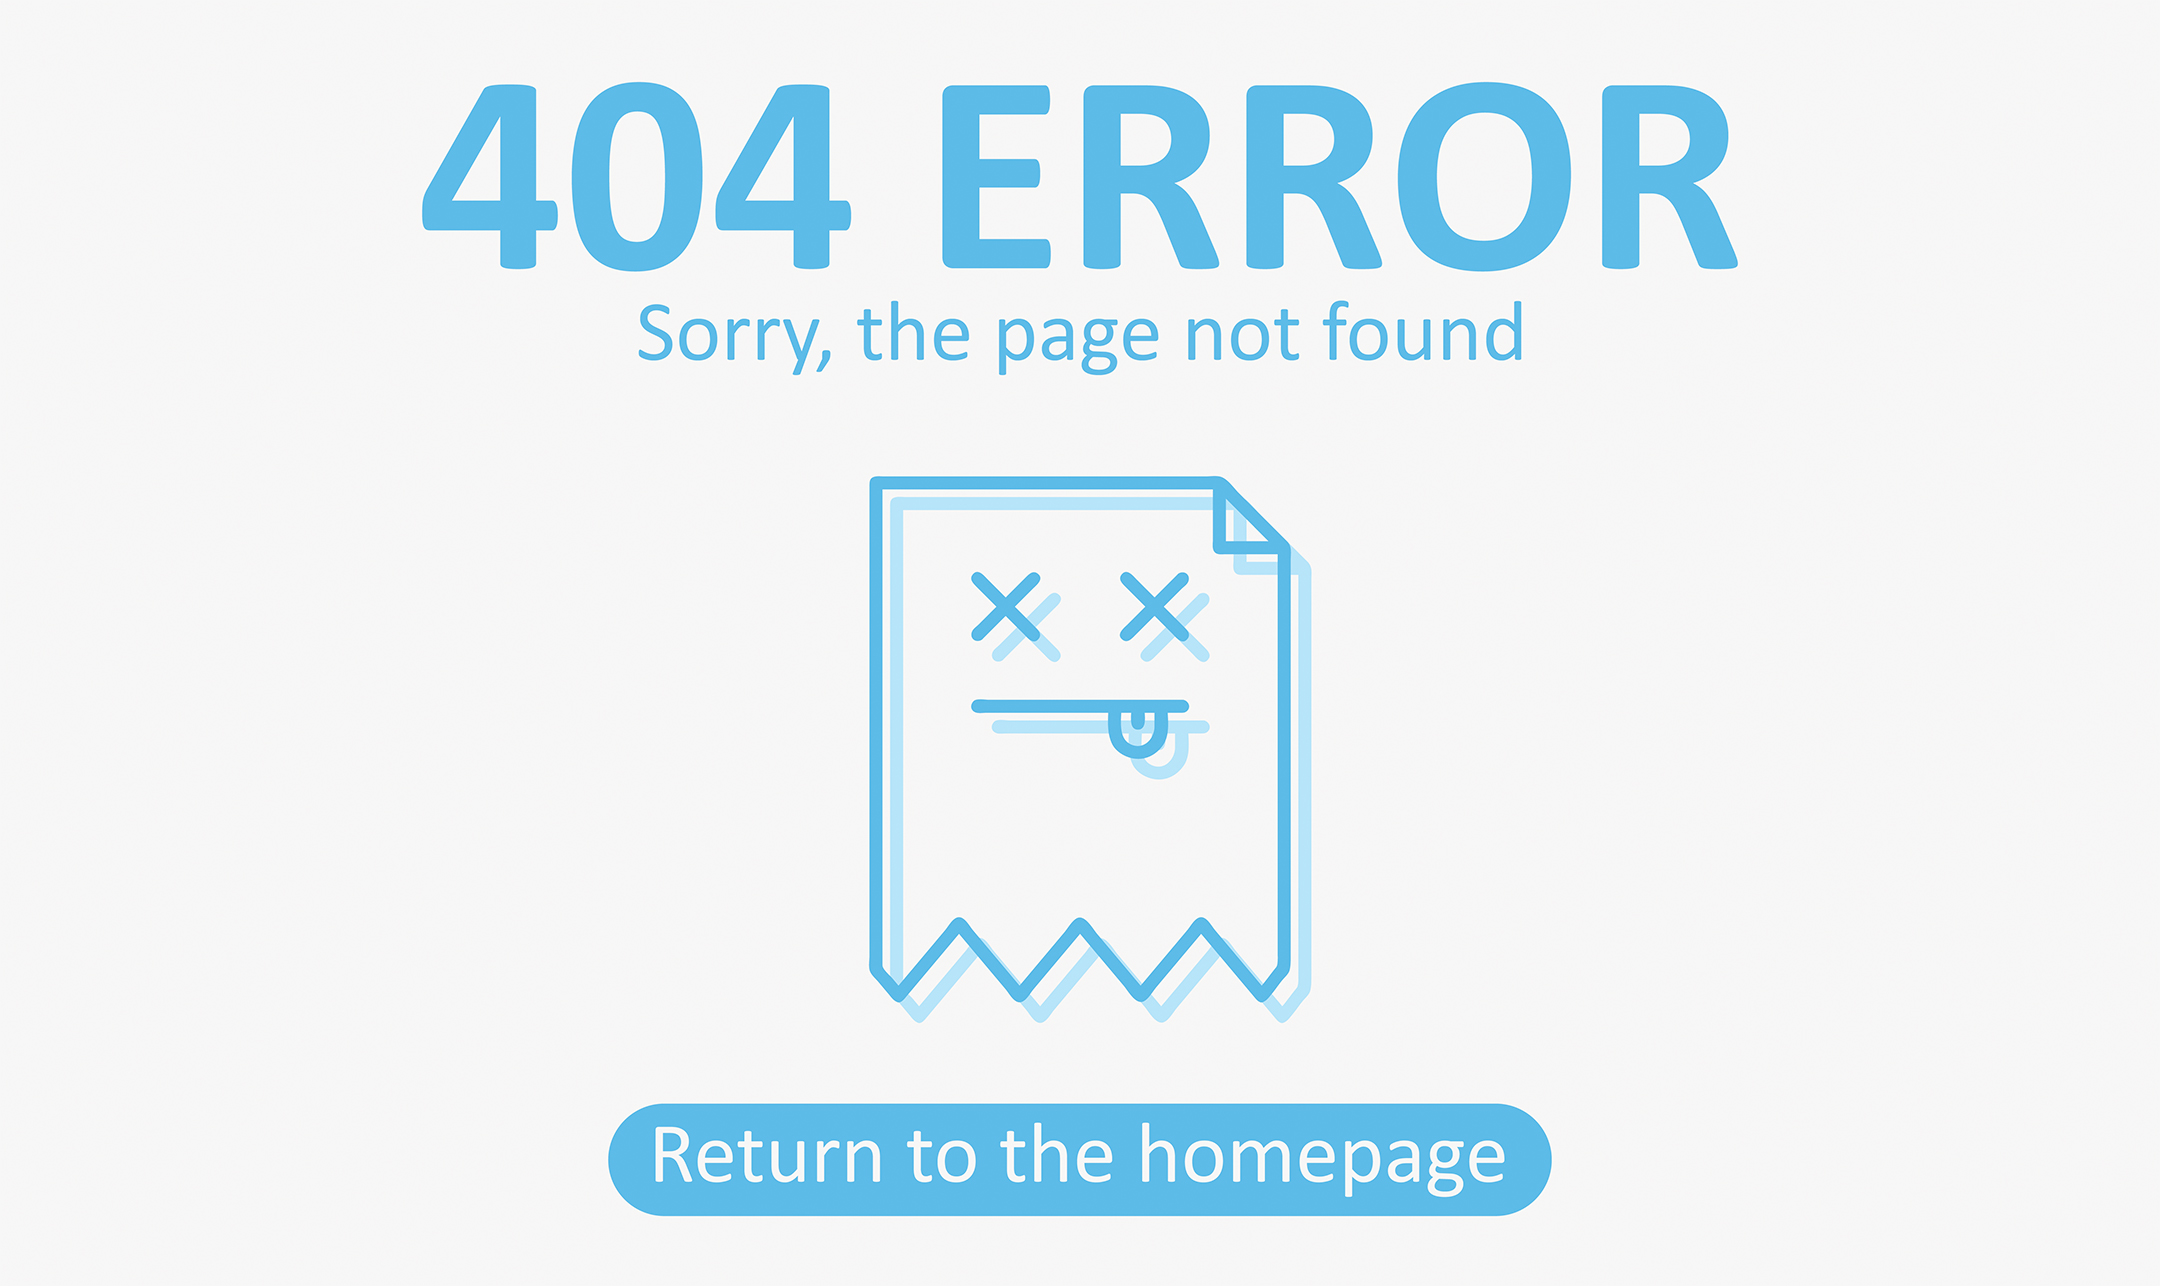 Graphic rendering of a 404 Page Not Found error screen